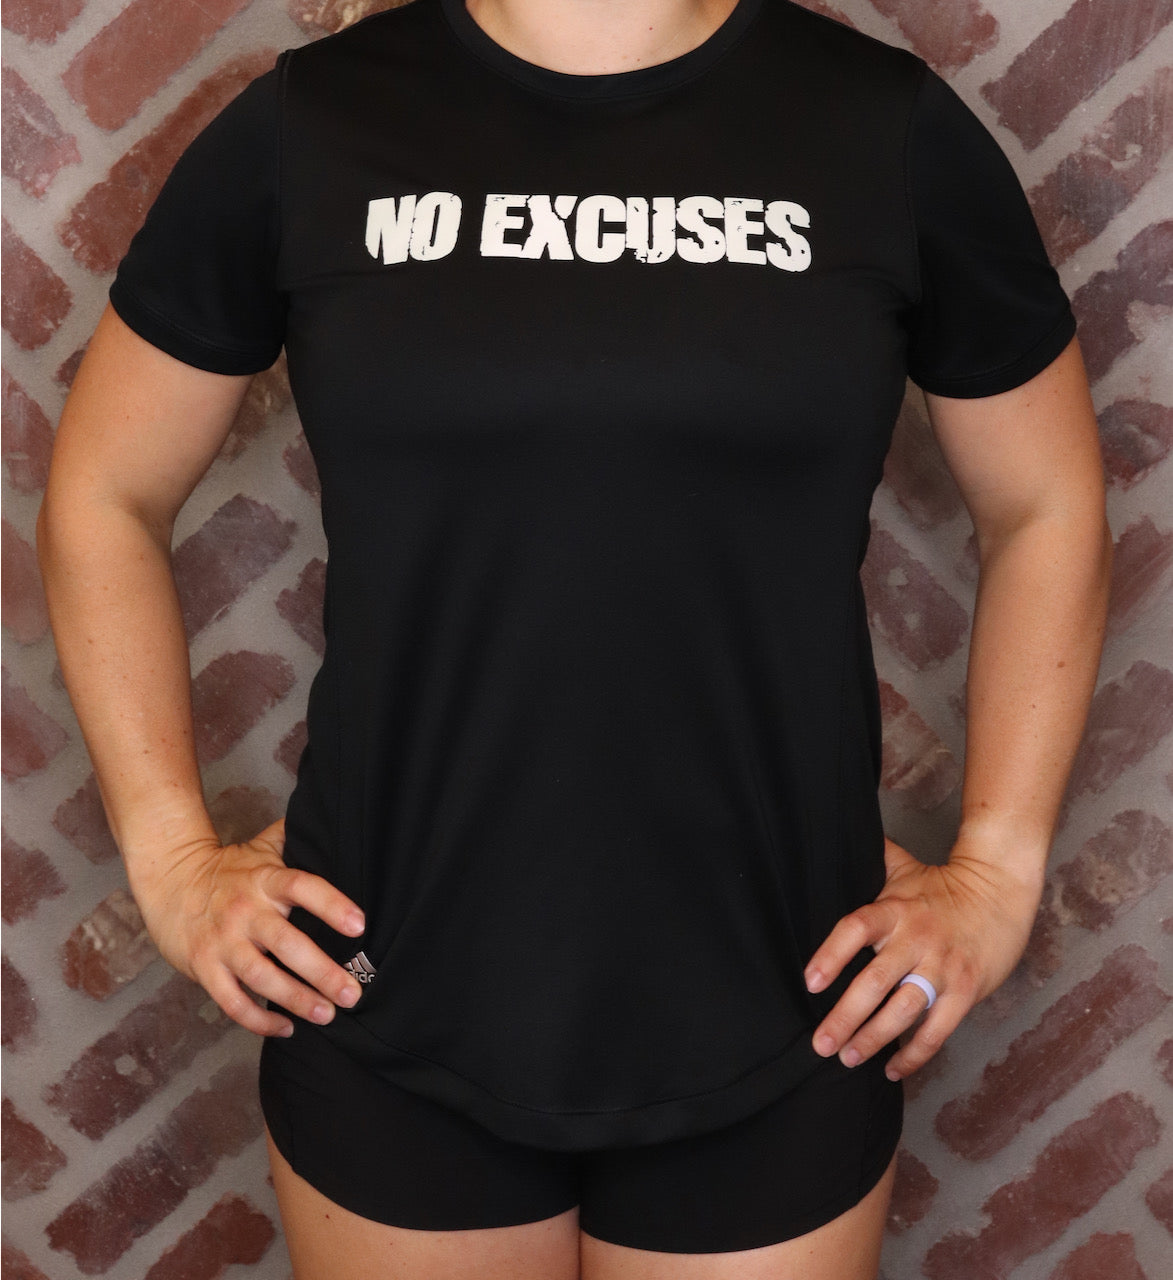 MK Supplements NO EXCUSES Women's T-Shirt in Black.